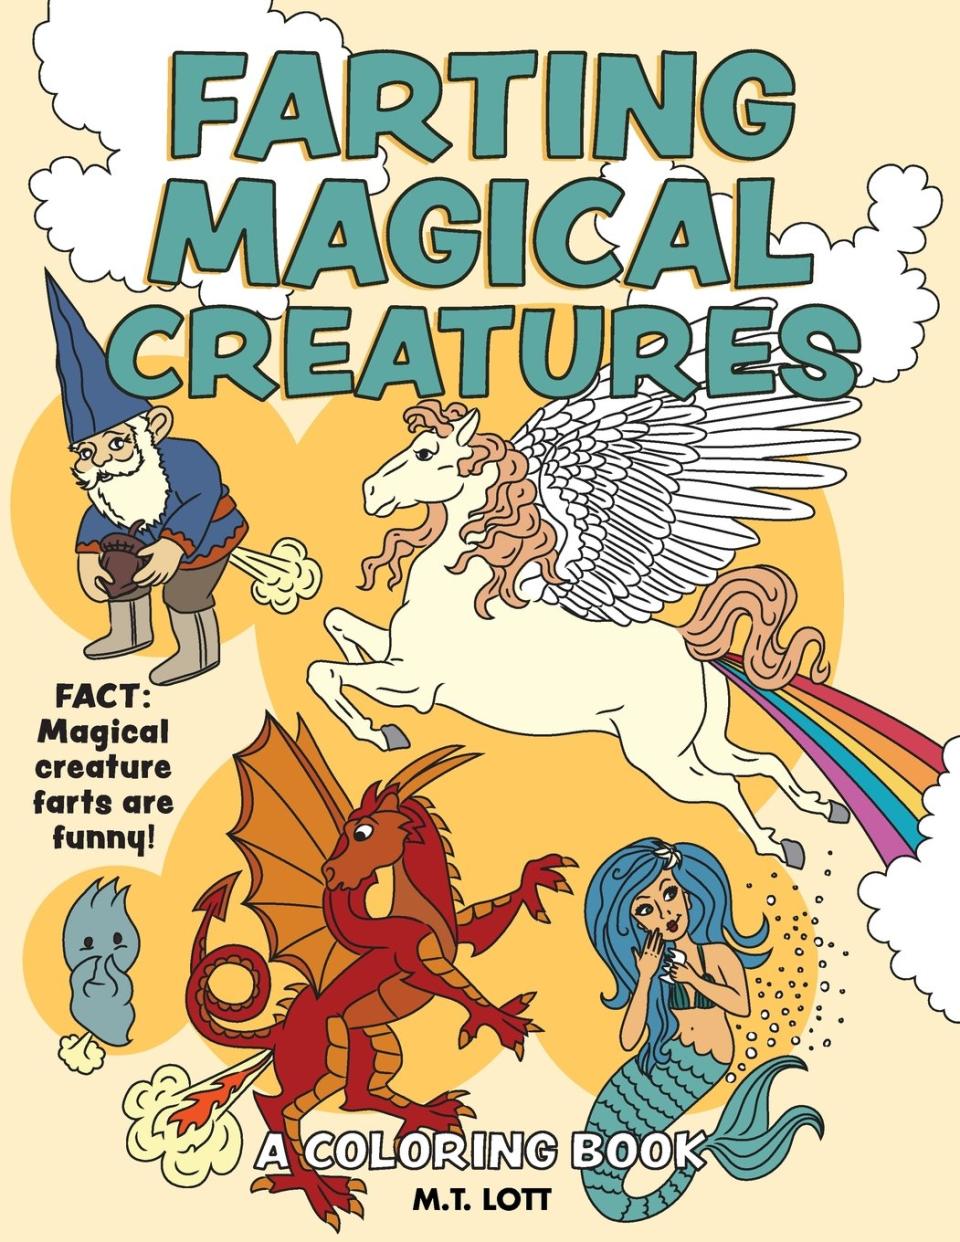 farting mythical creatures, funny coloring books